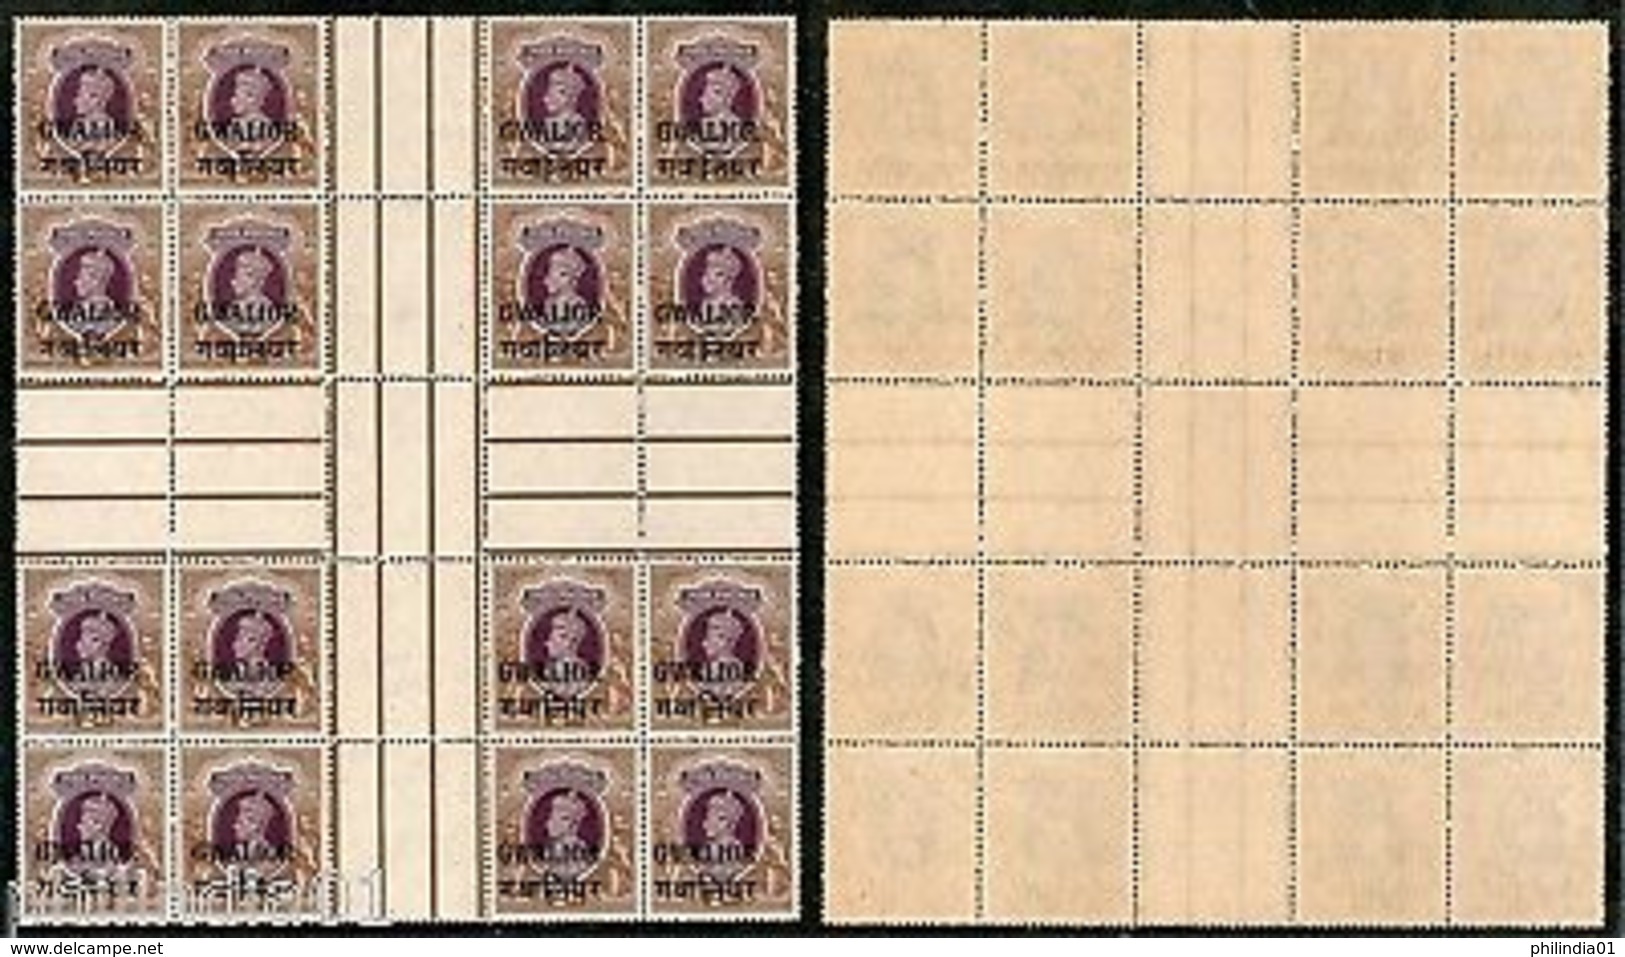 India Gwalior State 2 Rs KG VI SG 113 / Sc 113 Cross Gutter BLK/4 Cat $1000 MNH - Gwalior